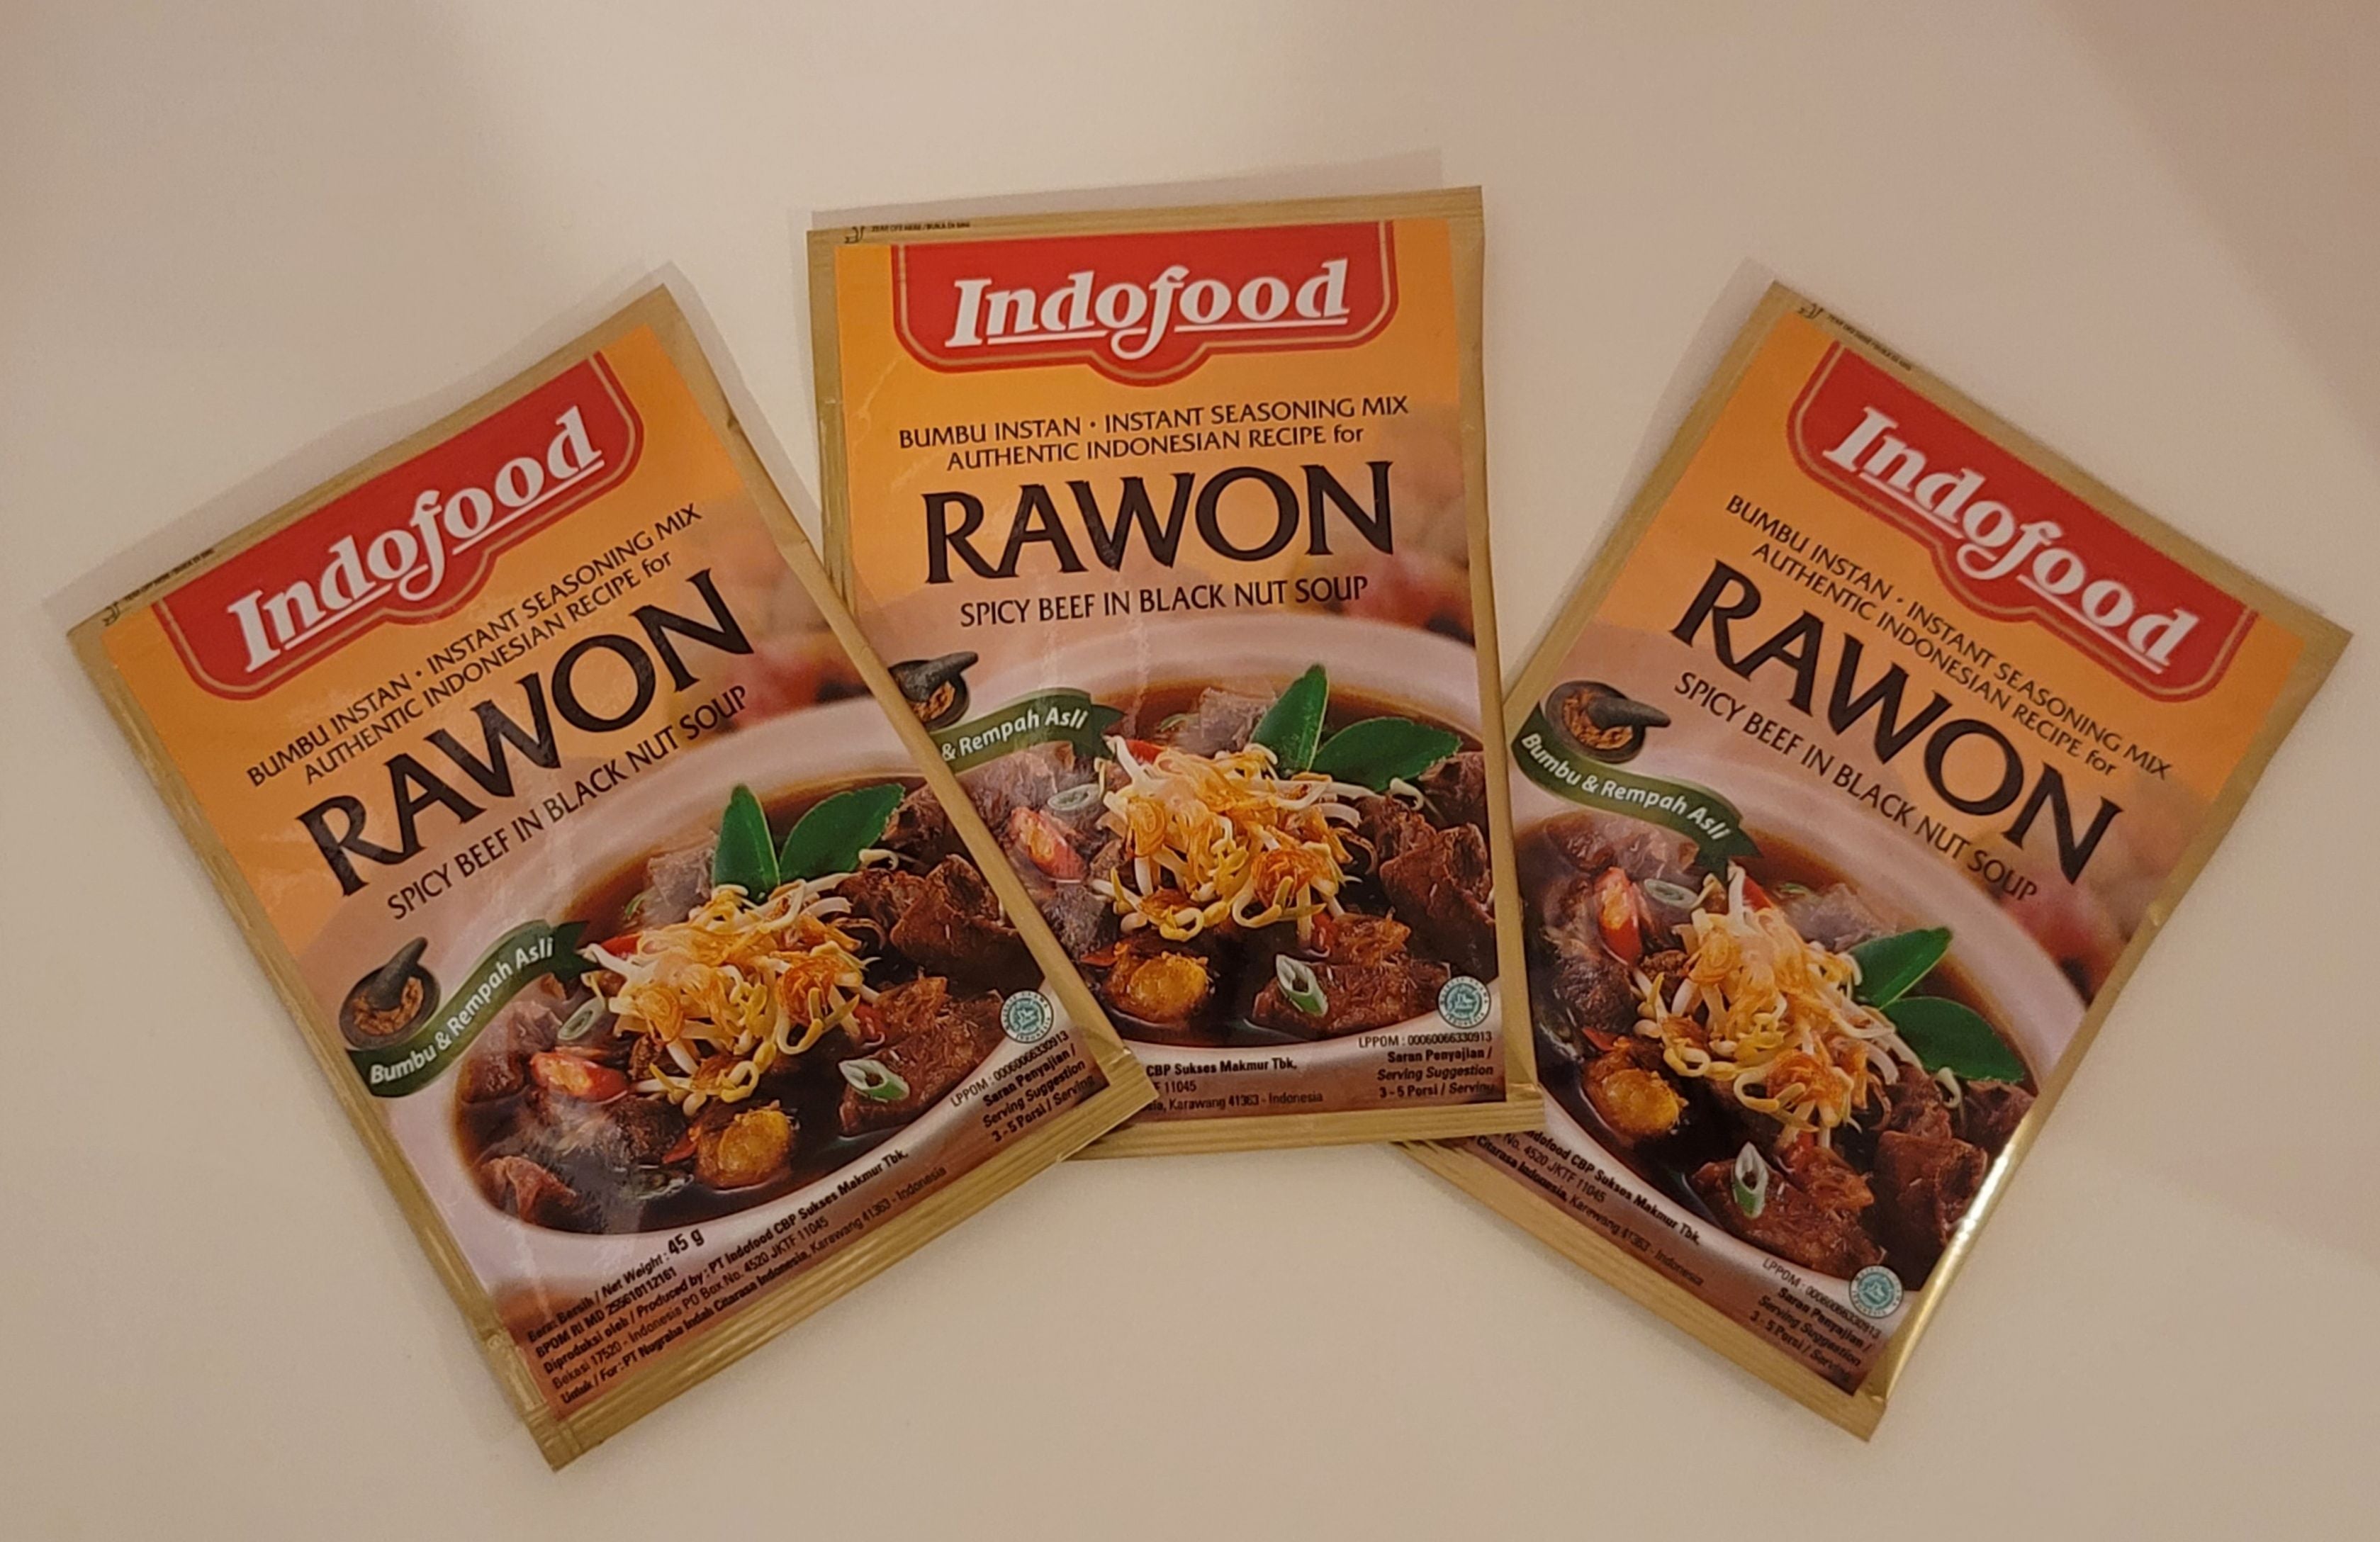 Indofood Rawon (Spicy Beef in Black Nut Soup)